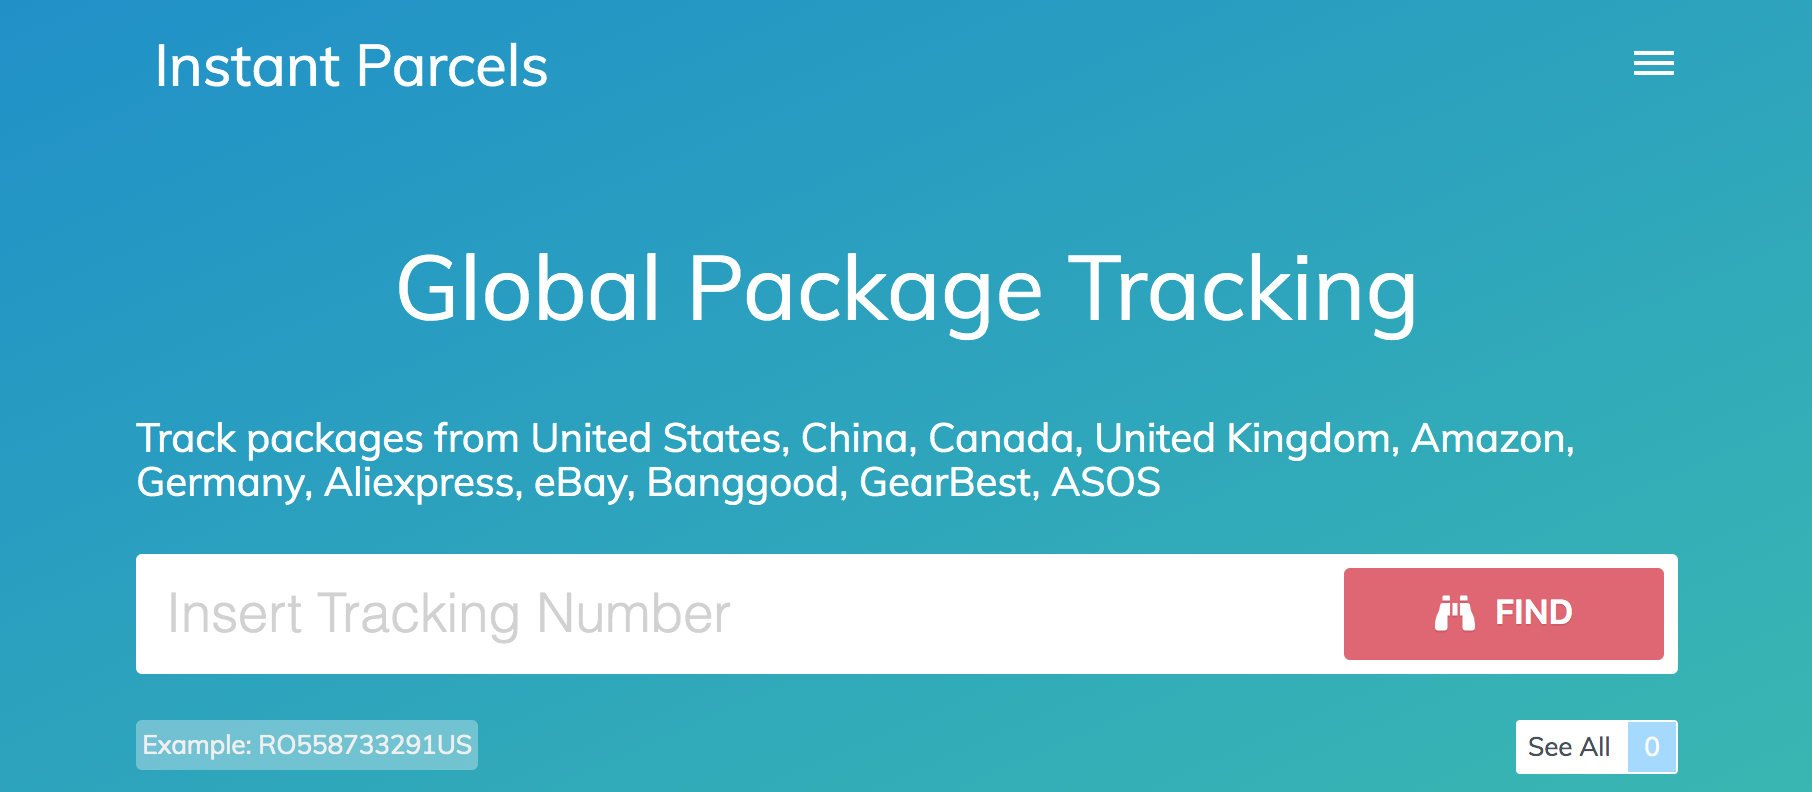 Universal Parcel Tracking - Global Package Tracking